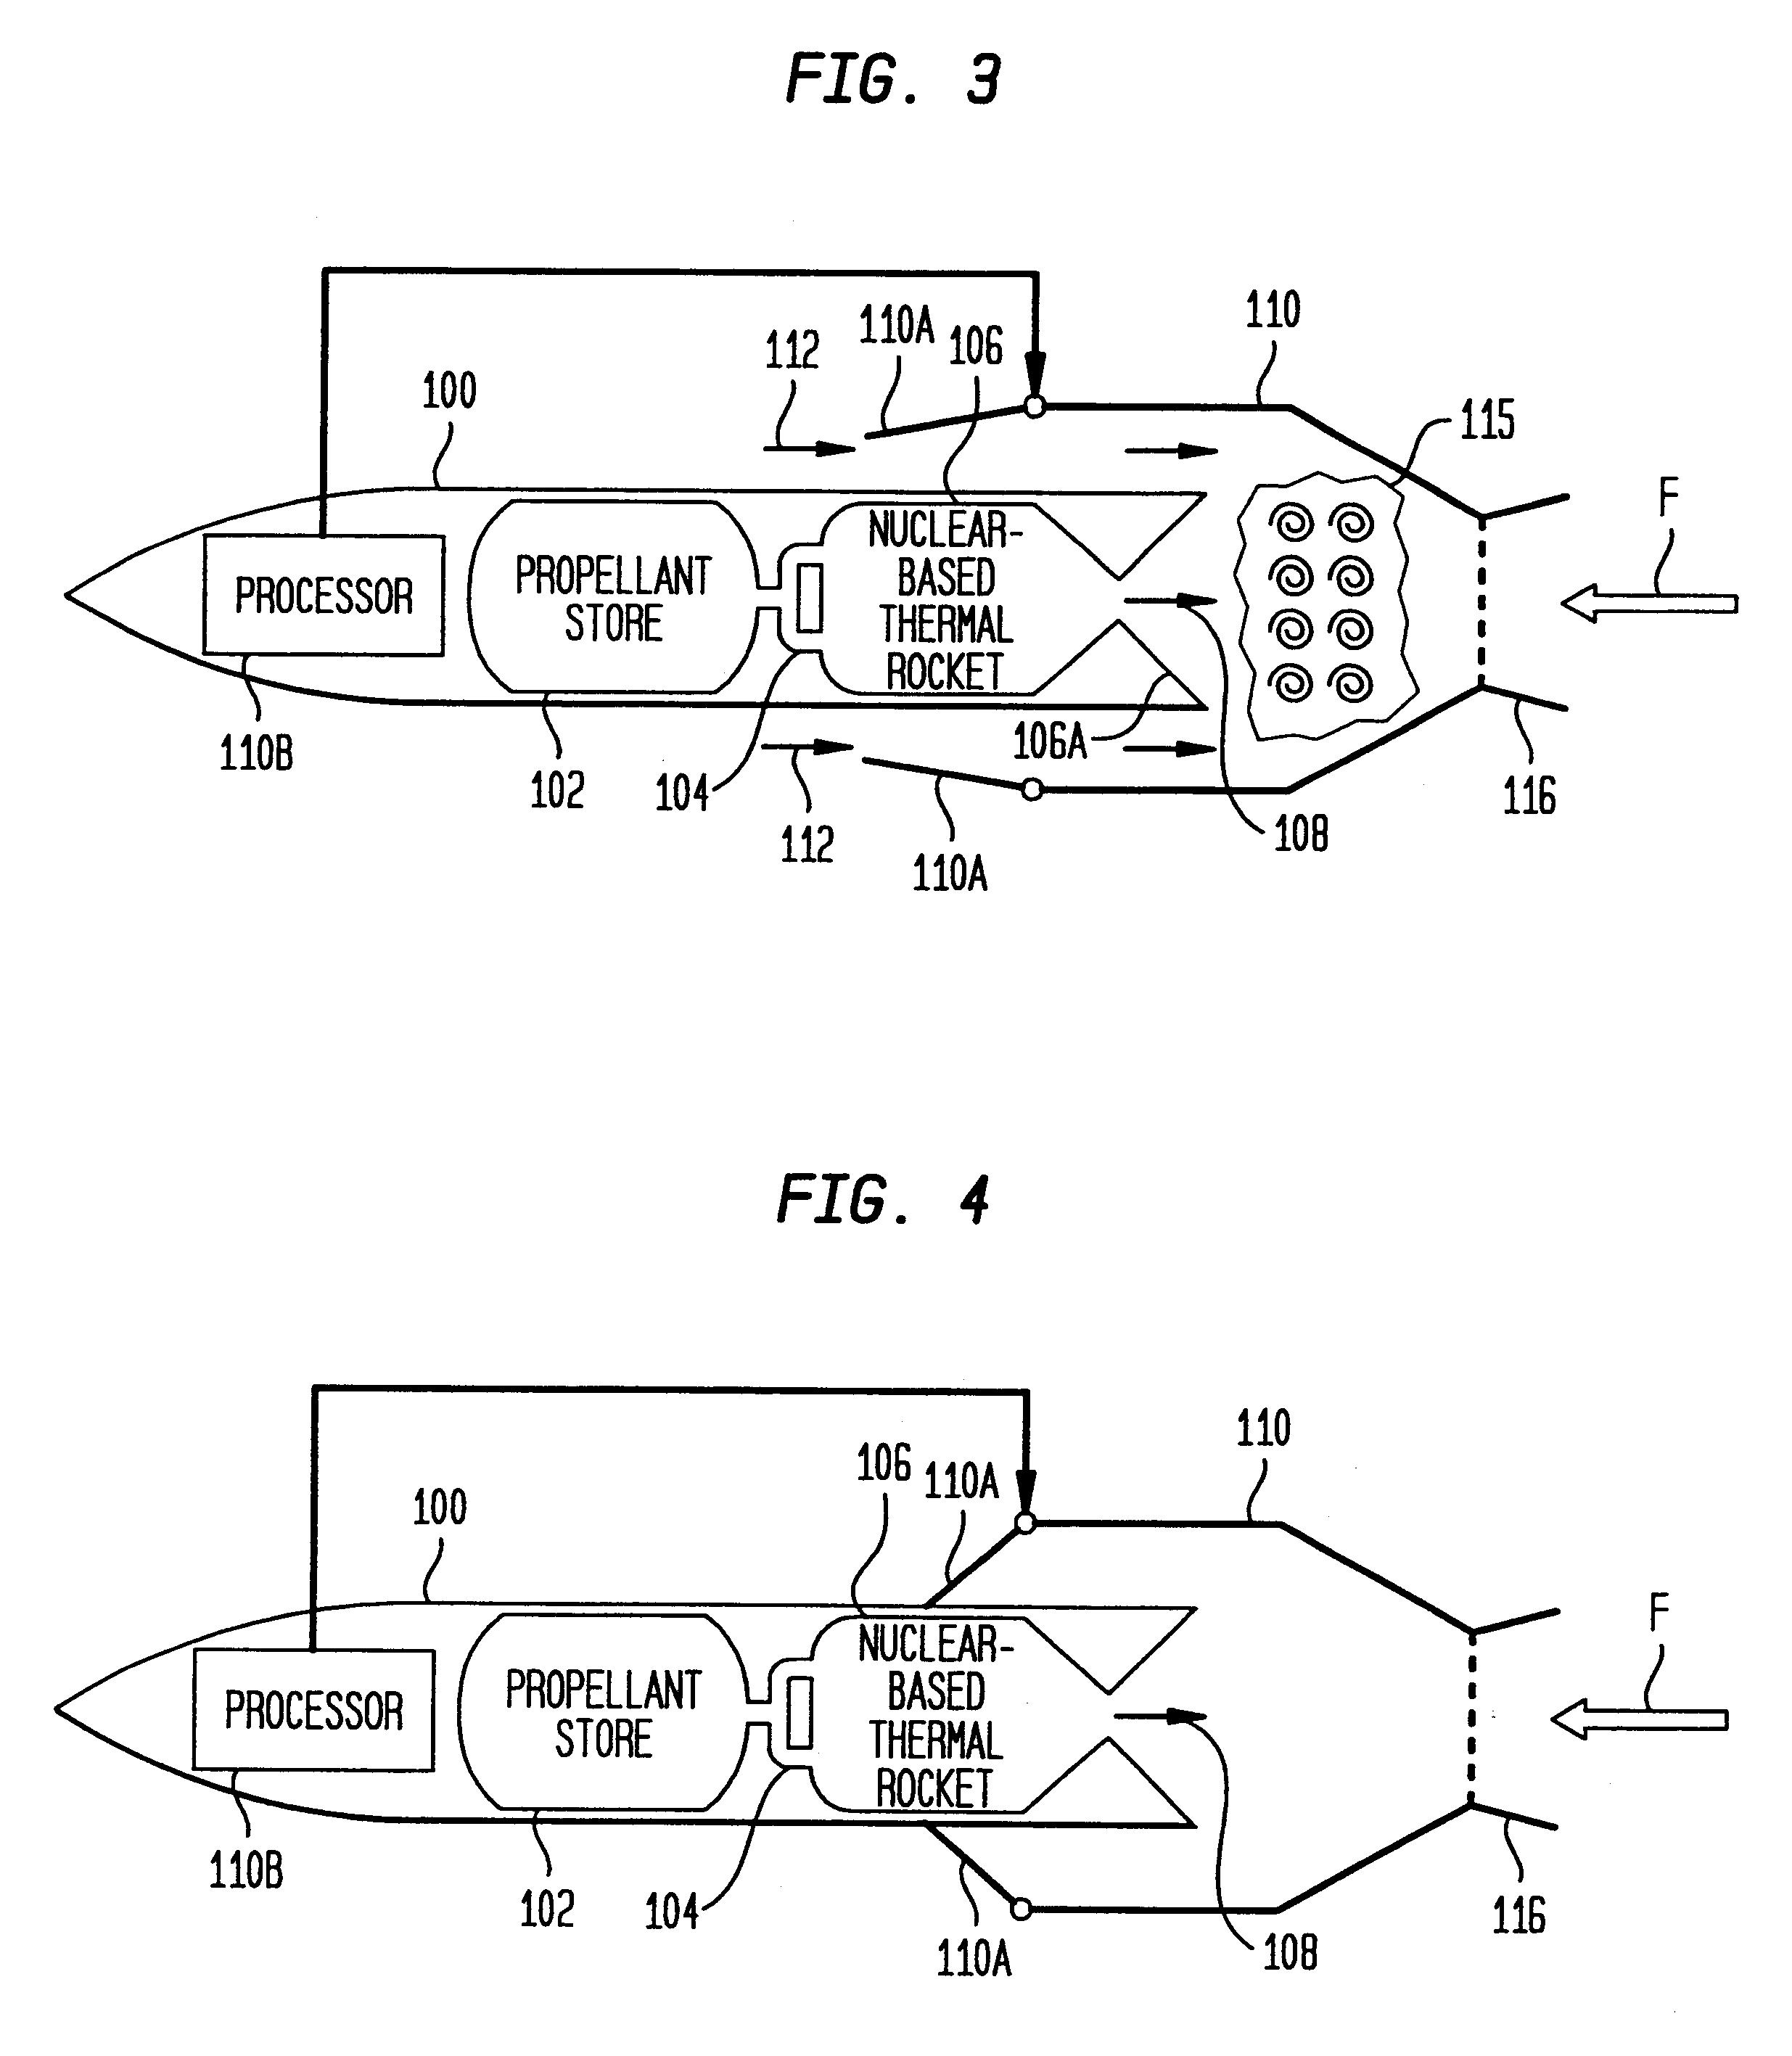 Atomic-based combined cycle propulsion system and method